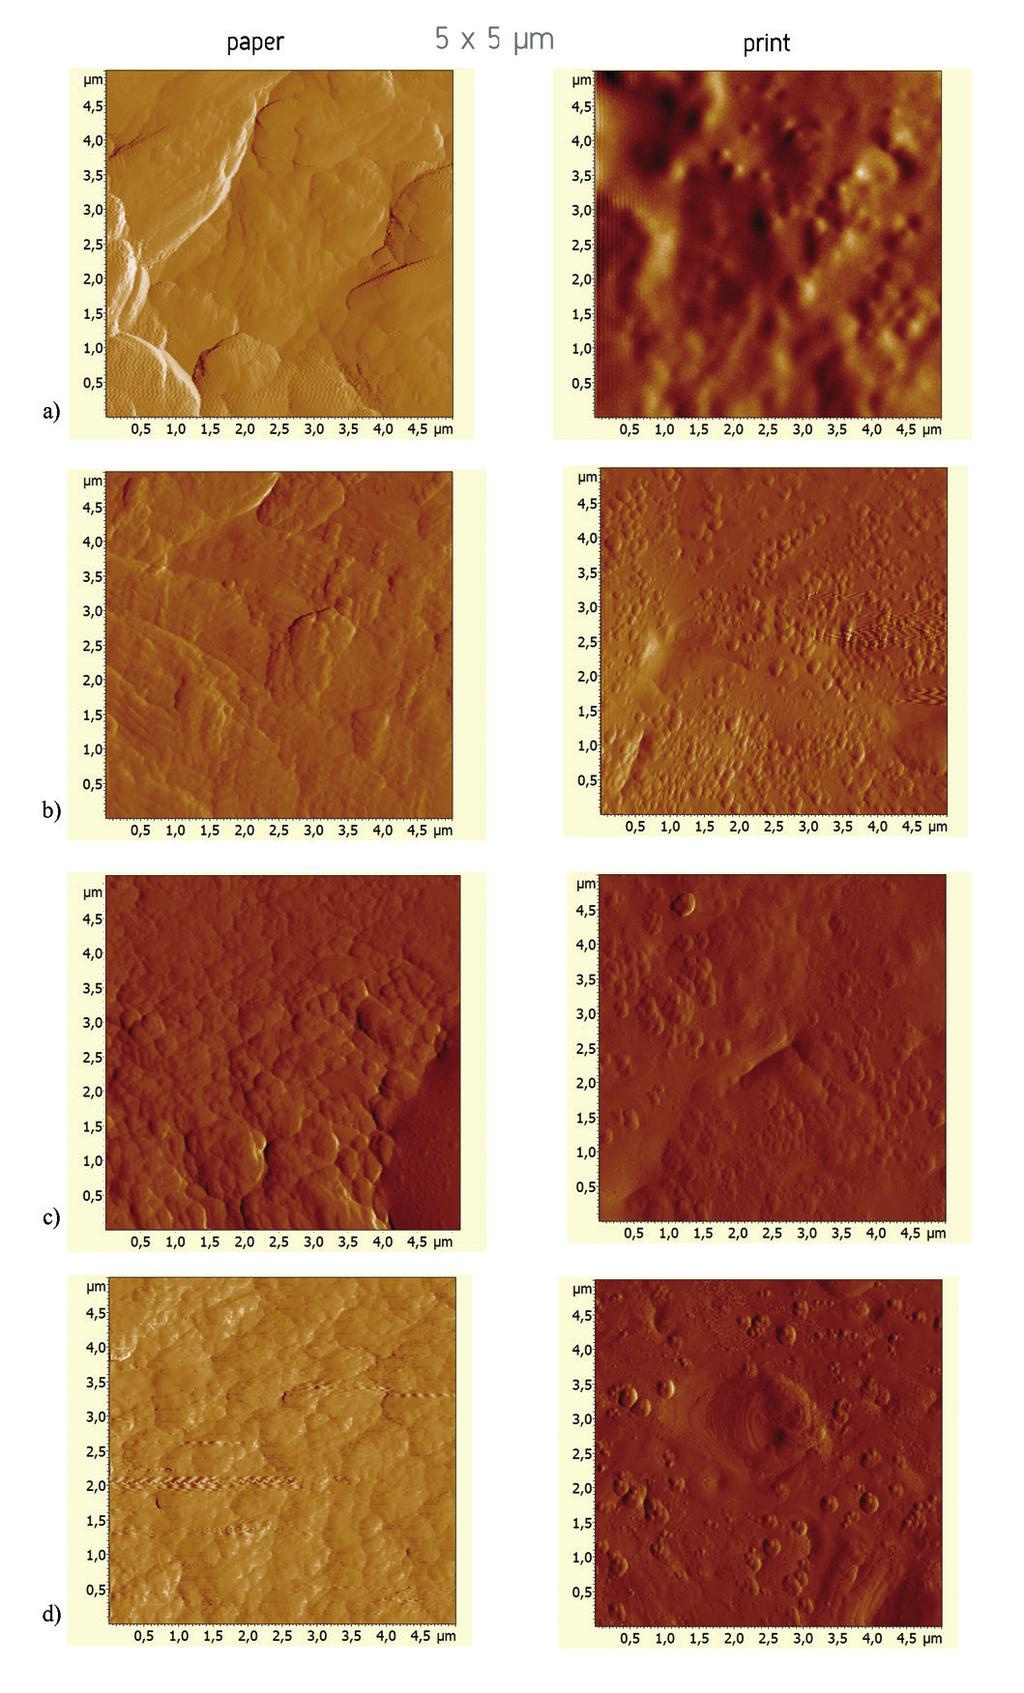 »» Figure 1: The surface topography illustrated by 2D error signal AFM images of (5 μm x 5 μm) scan areas of samples before and after printing: a) A, uncoated; b) B, uncoated; c) C, coated and d) D,